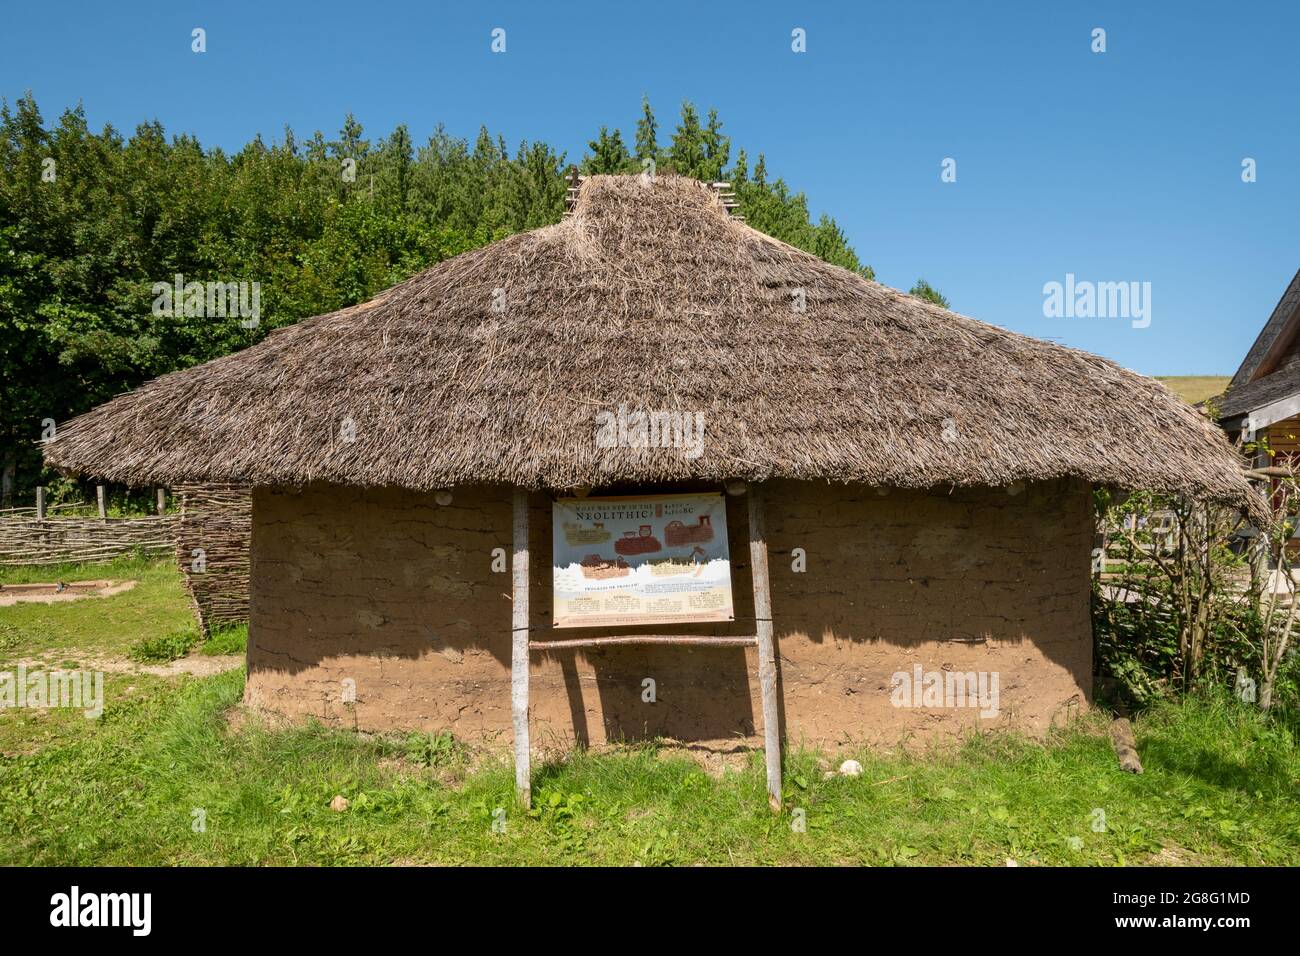 Neolithic, new stone age thatched house or building, reconstructed at Butser Ancient Farm open-air archeological museum in Hampshire, England, UK Stock Photo